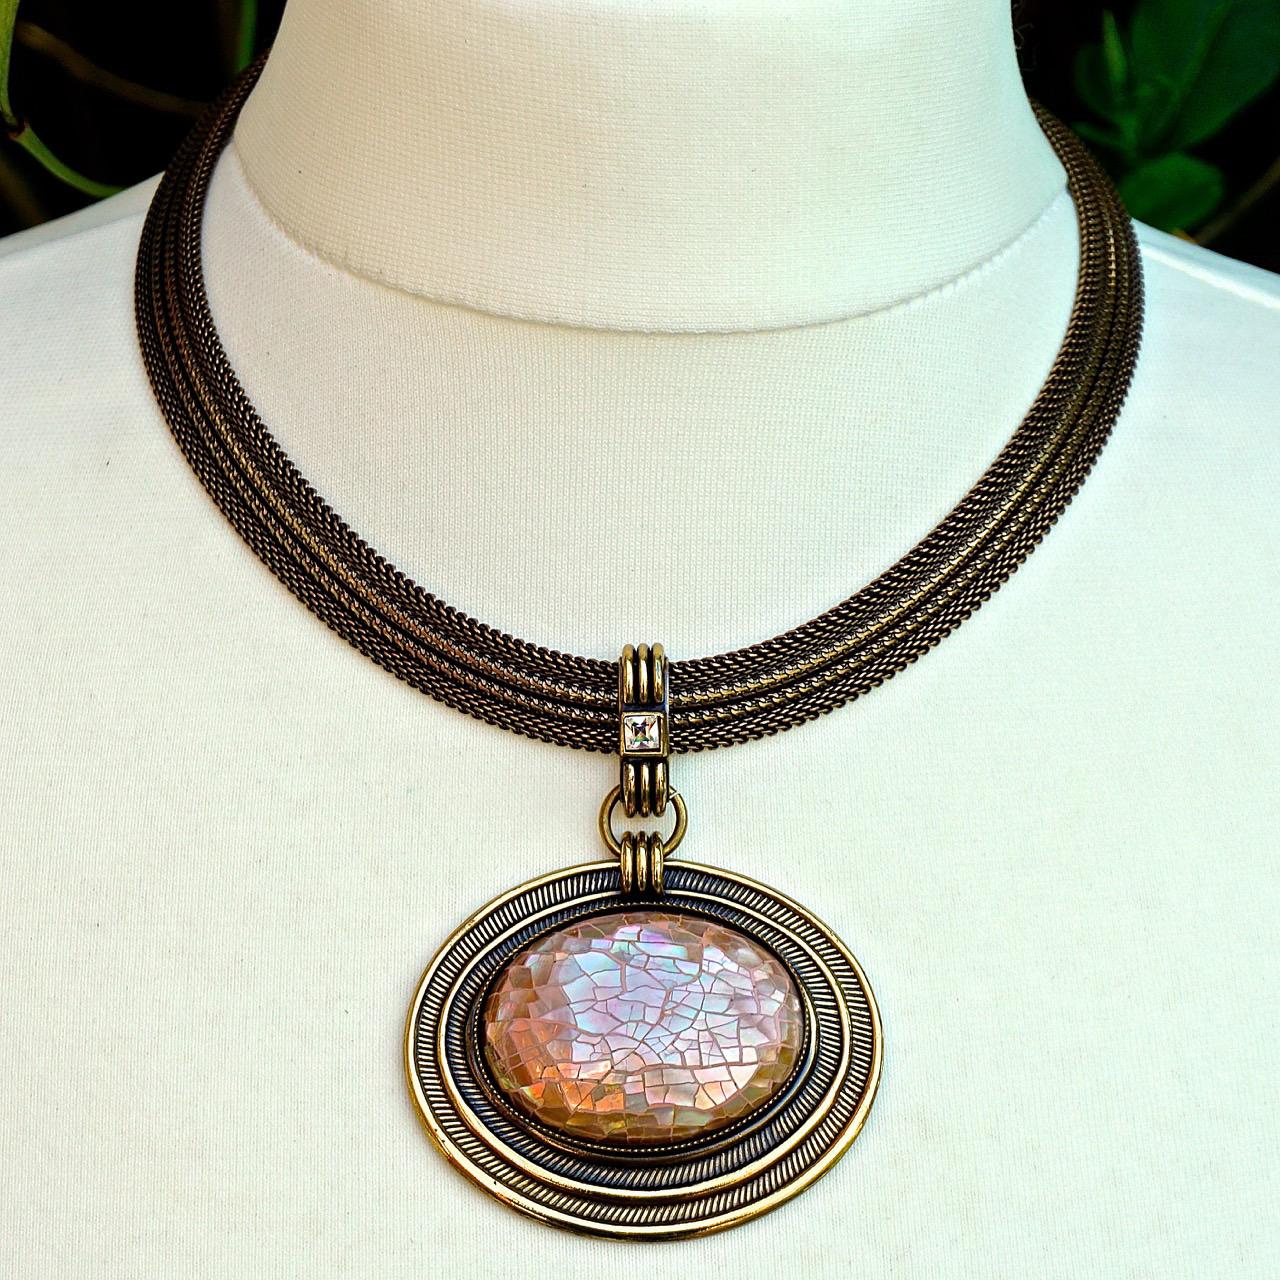 Fabulous Ermani Bulatti antiqued gold plated mesh necklace and pendant, featuring pink mother-of-pearl and a square crystal set in a lovely oval design. The necklace is length 39.5cm / 15.5 inches plus an extension of 20cm / 4 inches, by width